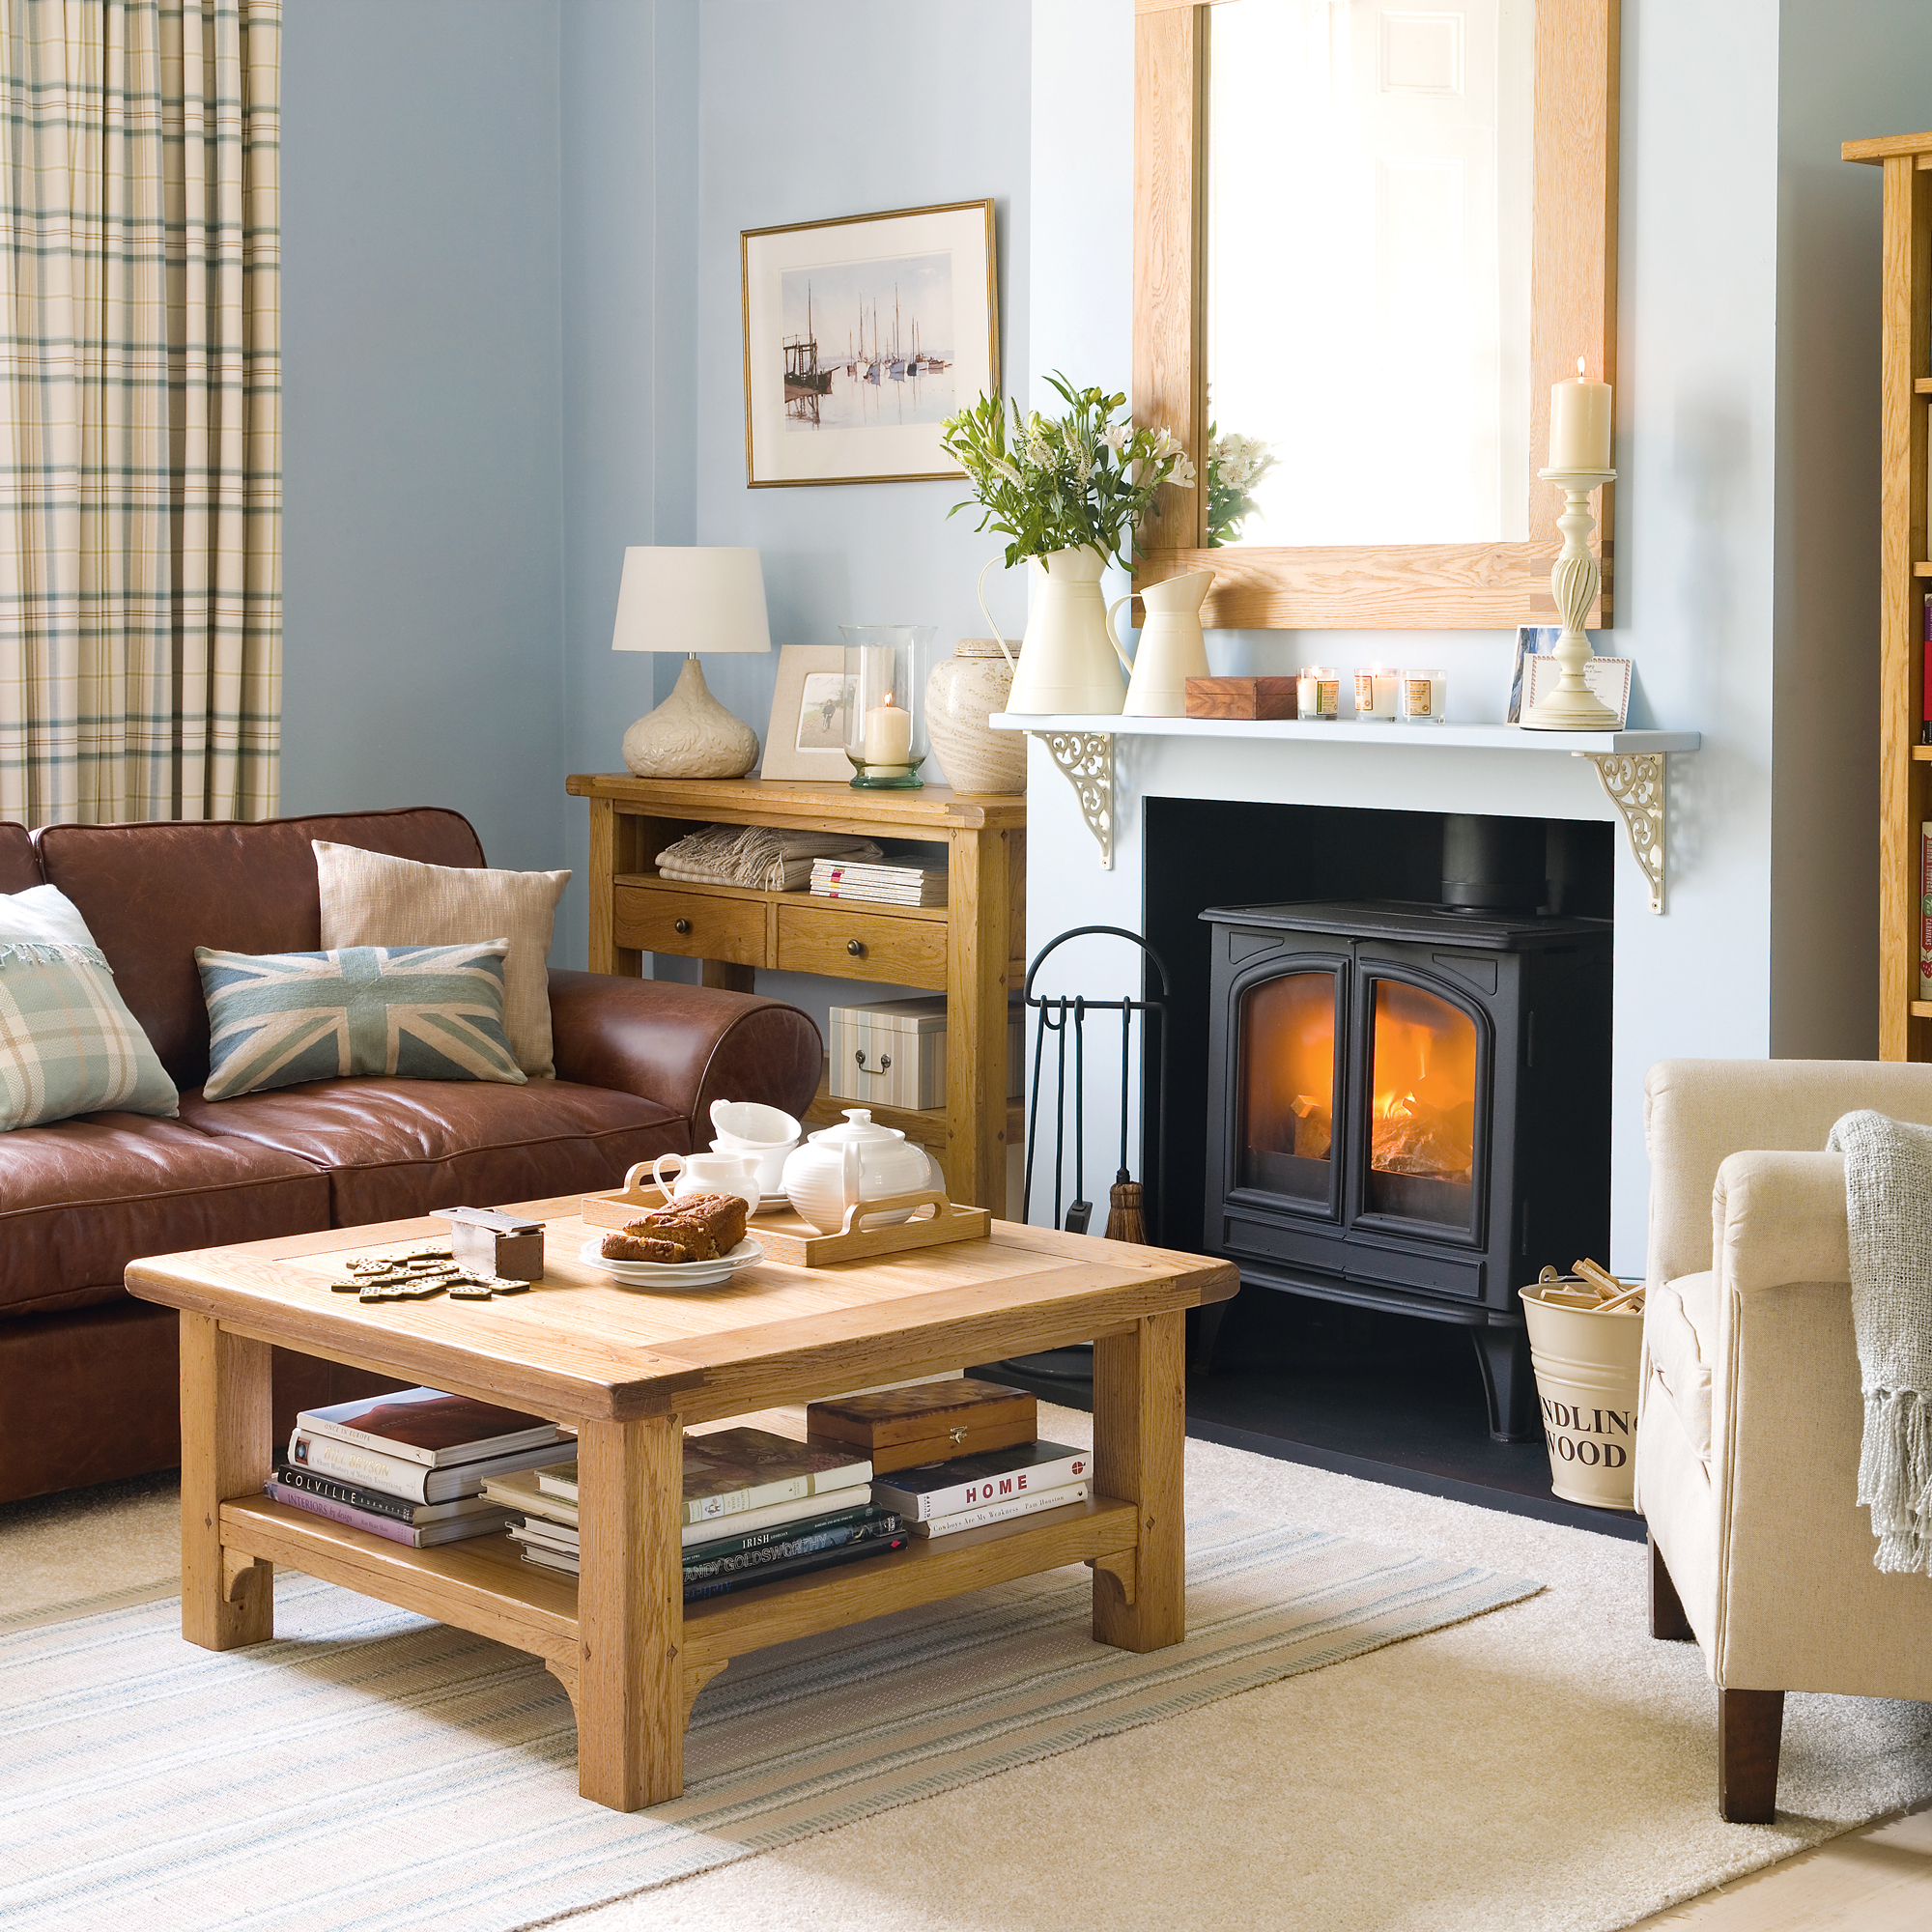 blue living room with wood burning stove